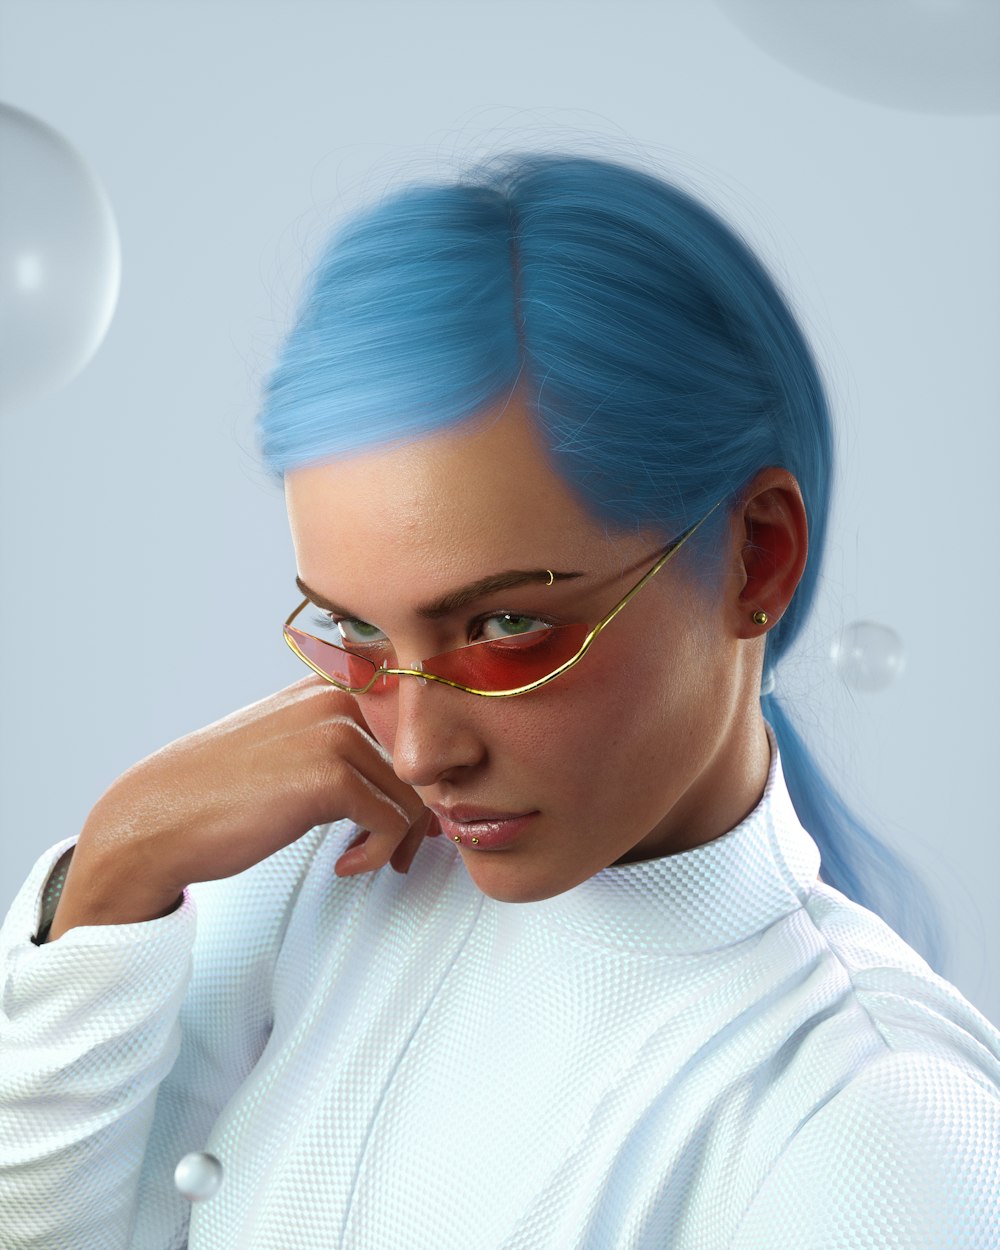 a woman with blue hair wearing glasses